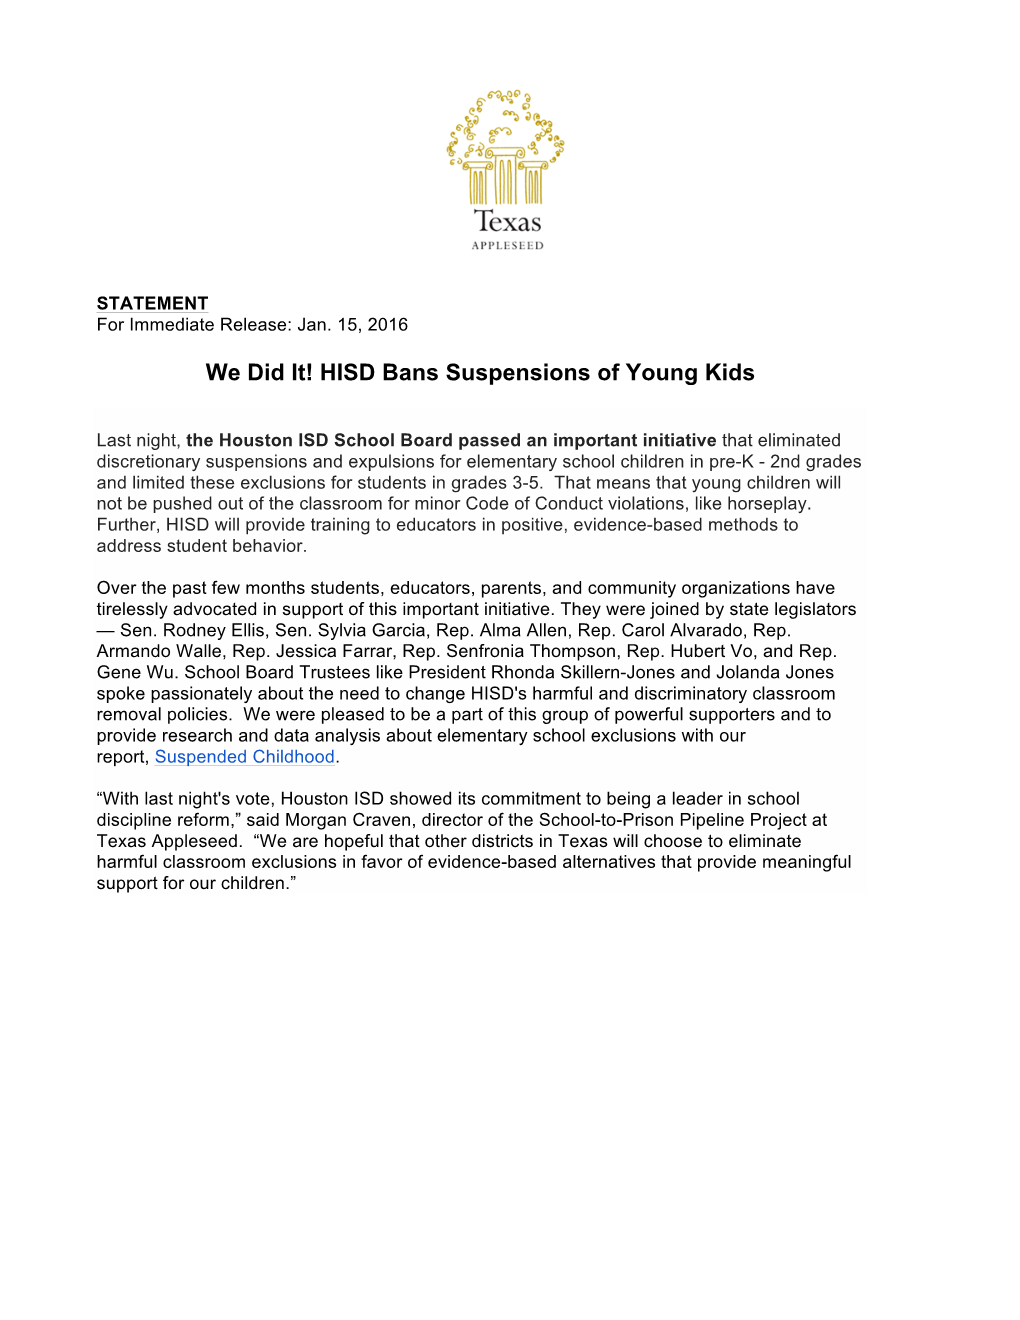 HISD Bans Suspensions of Young Kids